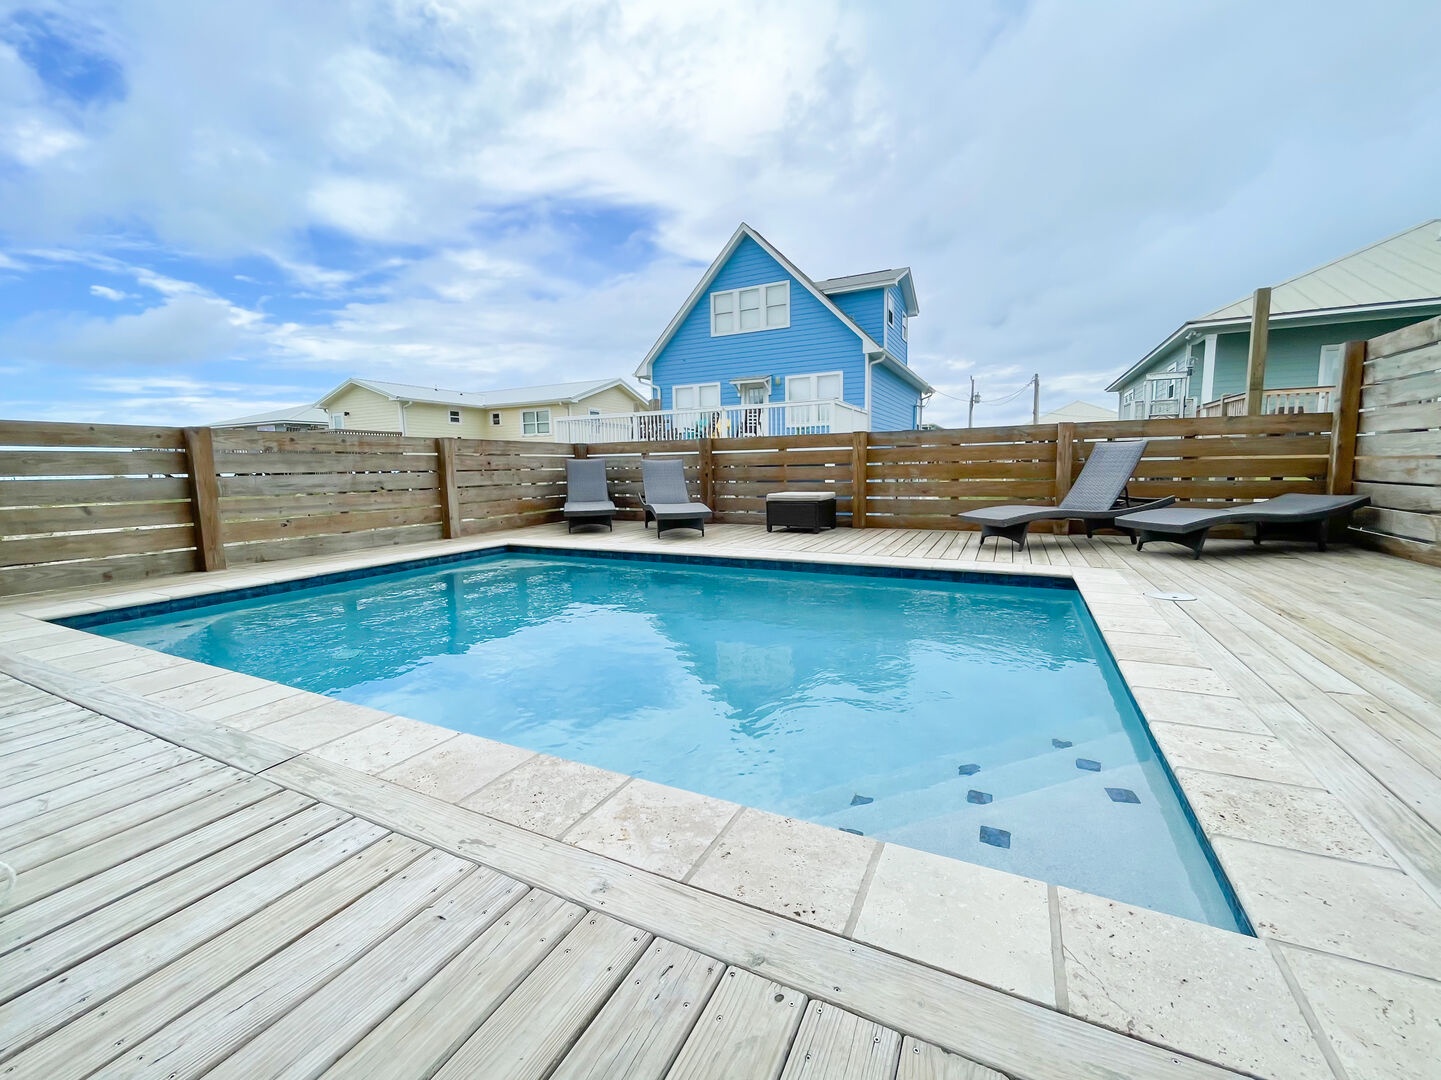 Private pool that can be heated during the cooler months (additional fees apply)